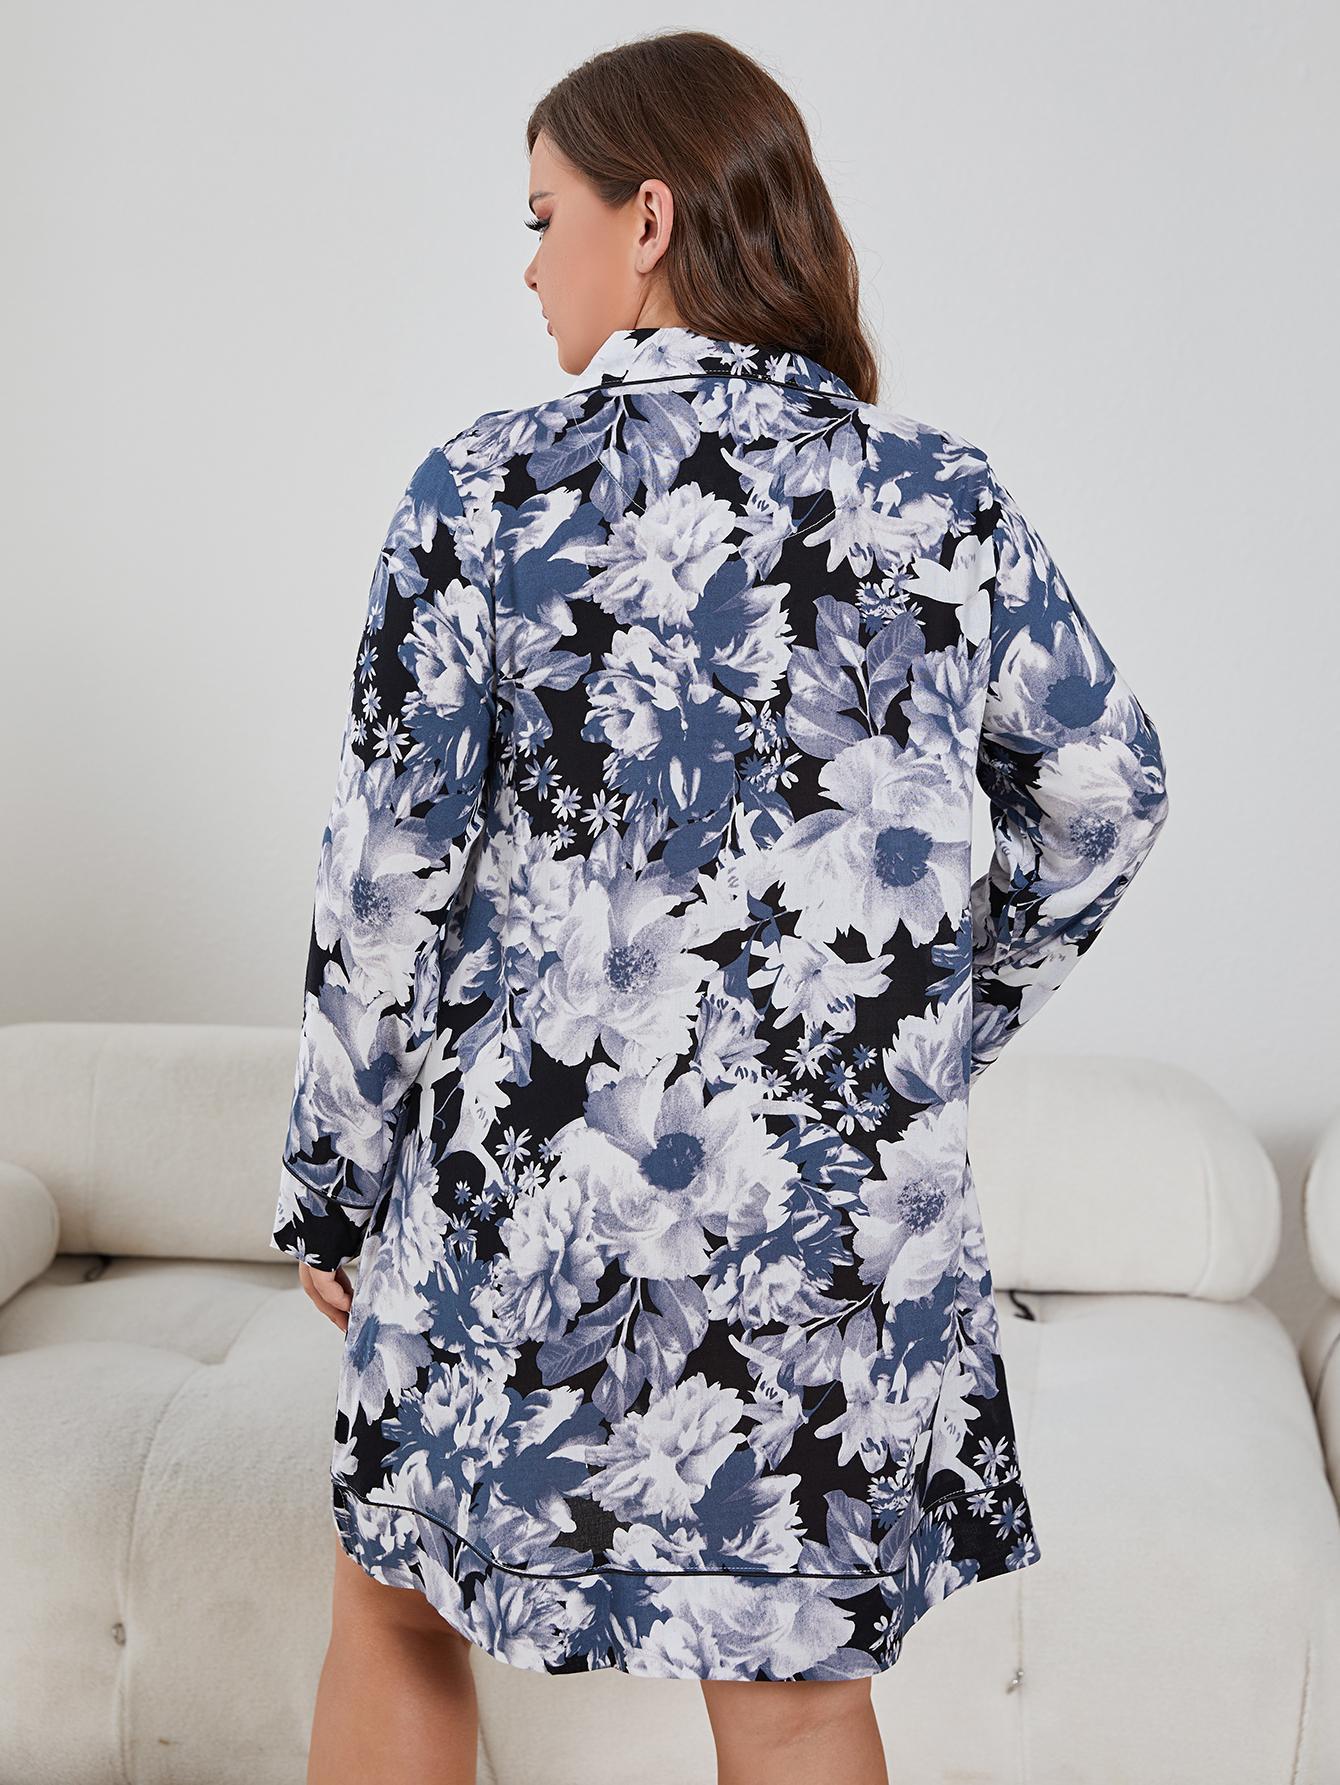 Plus Size Floral Lapel Collar Long Sleeve Night Dress - Tophatter Deals and Online Shopping - Electronics, Jewelry, Beauty, Health, Gadgets, Fashion - Tophatter's Discounts & Offers - tophatters - tophatters.co